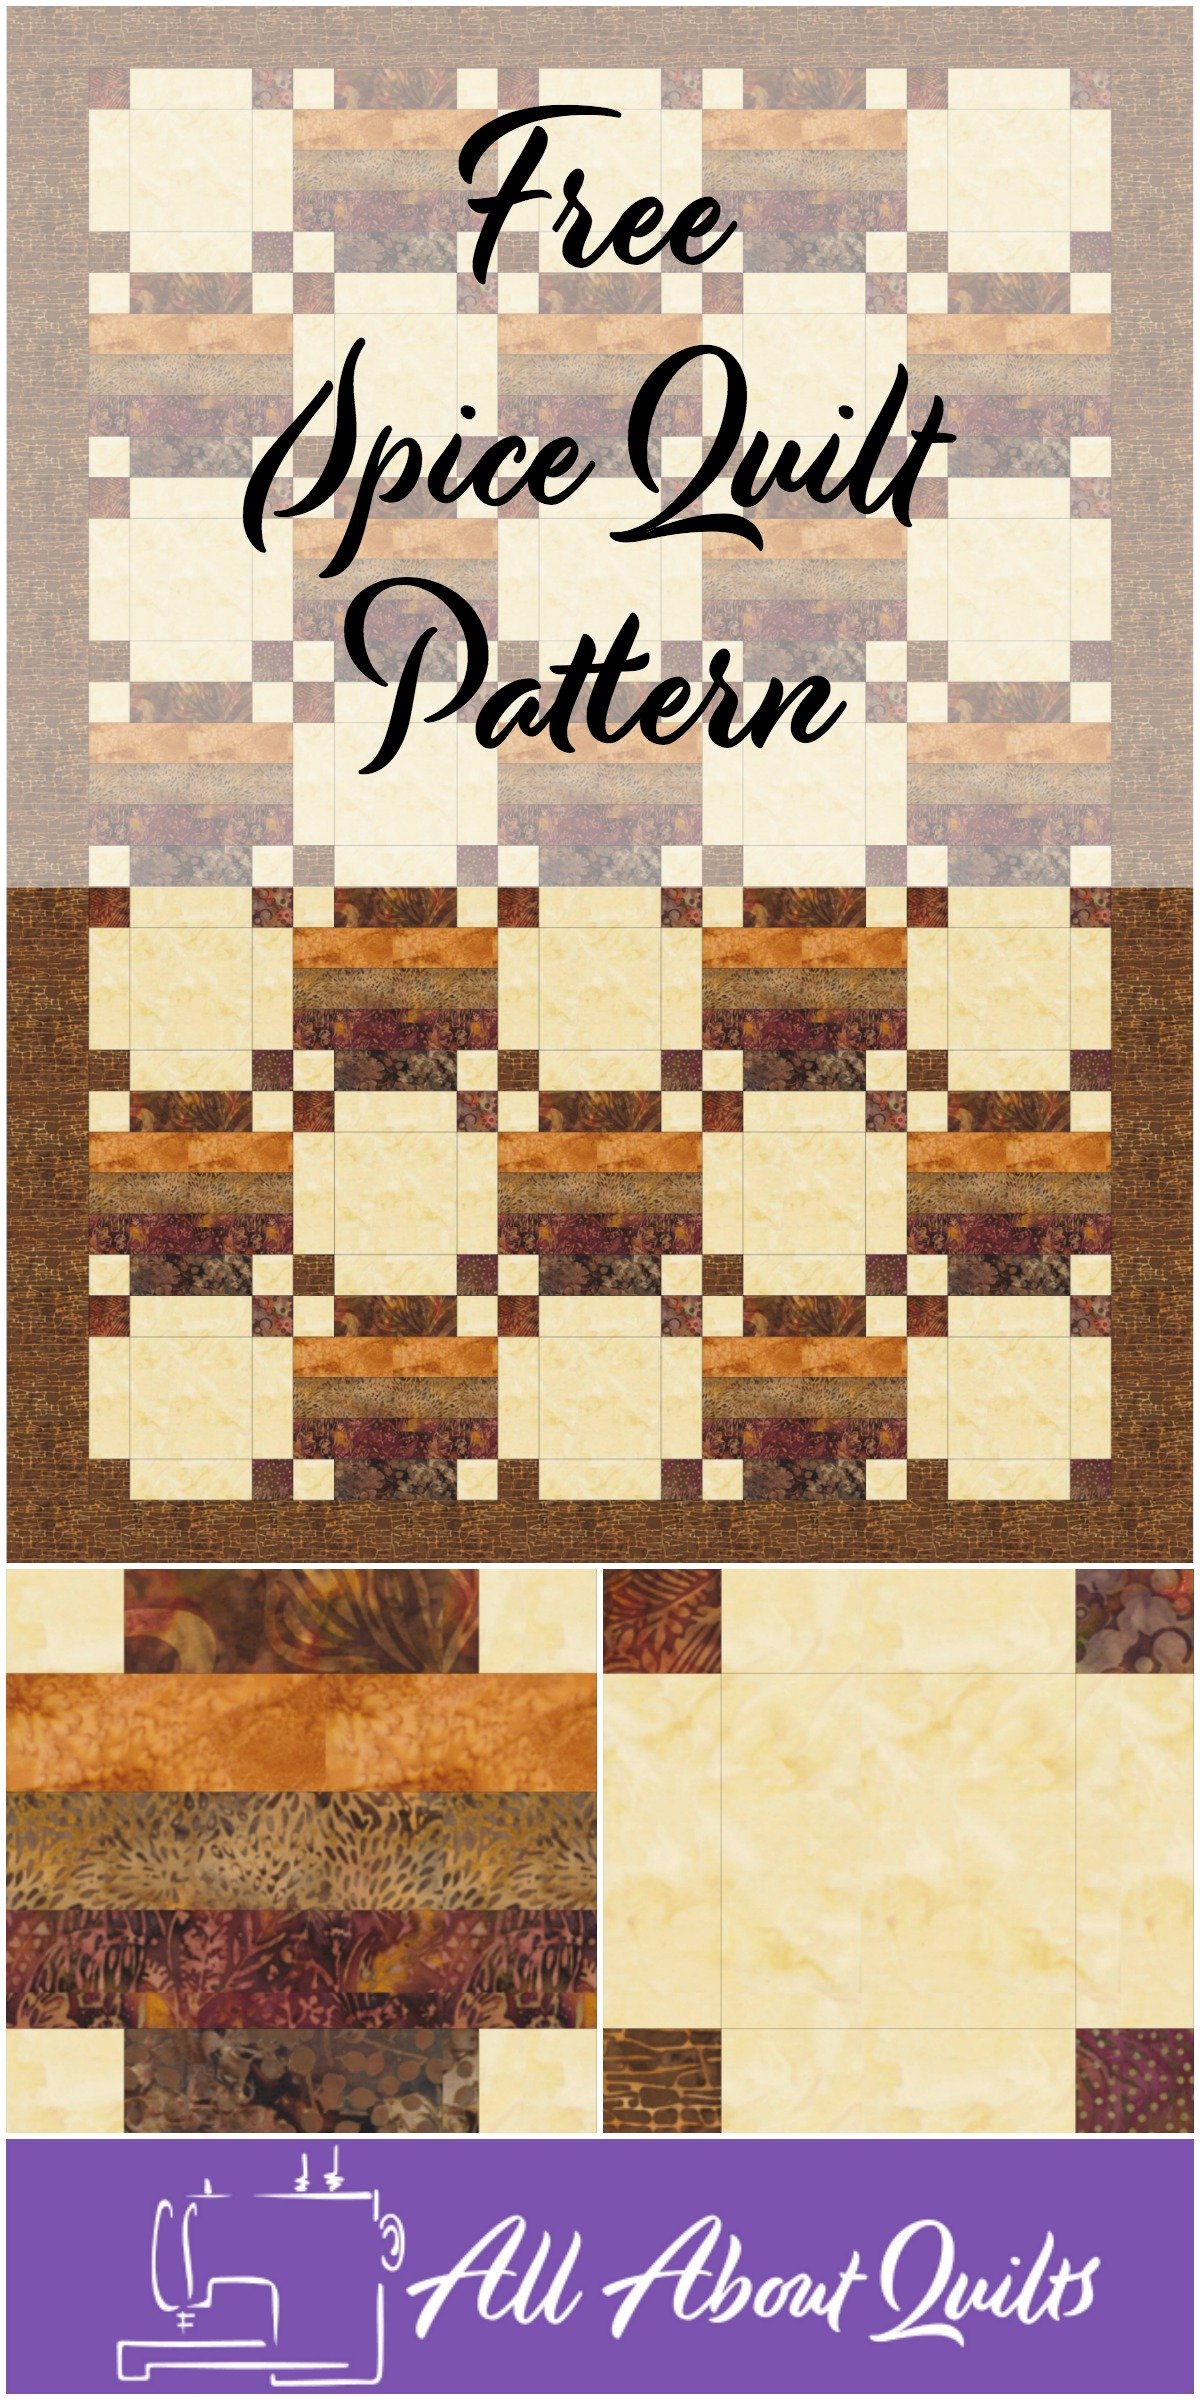 Free Spice quilt pattern